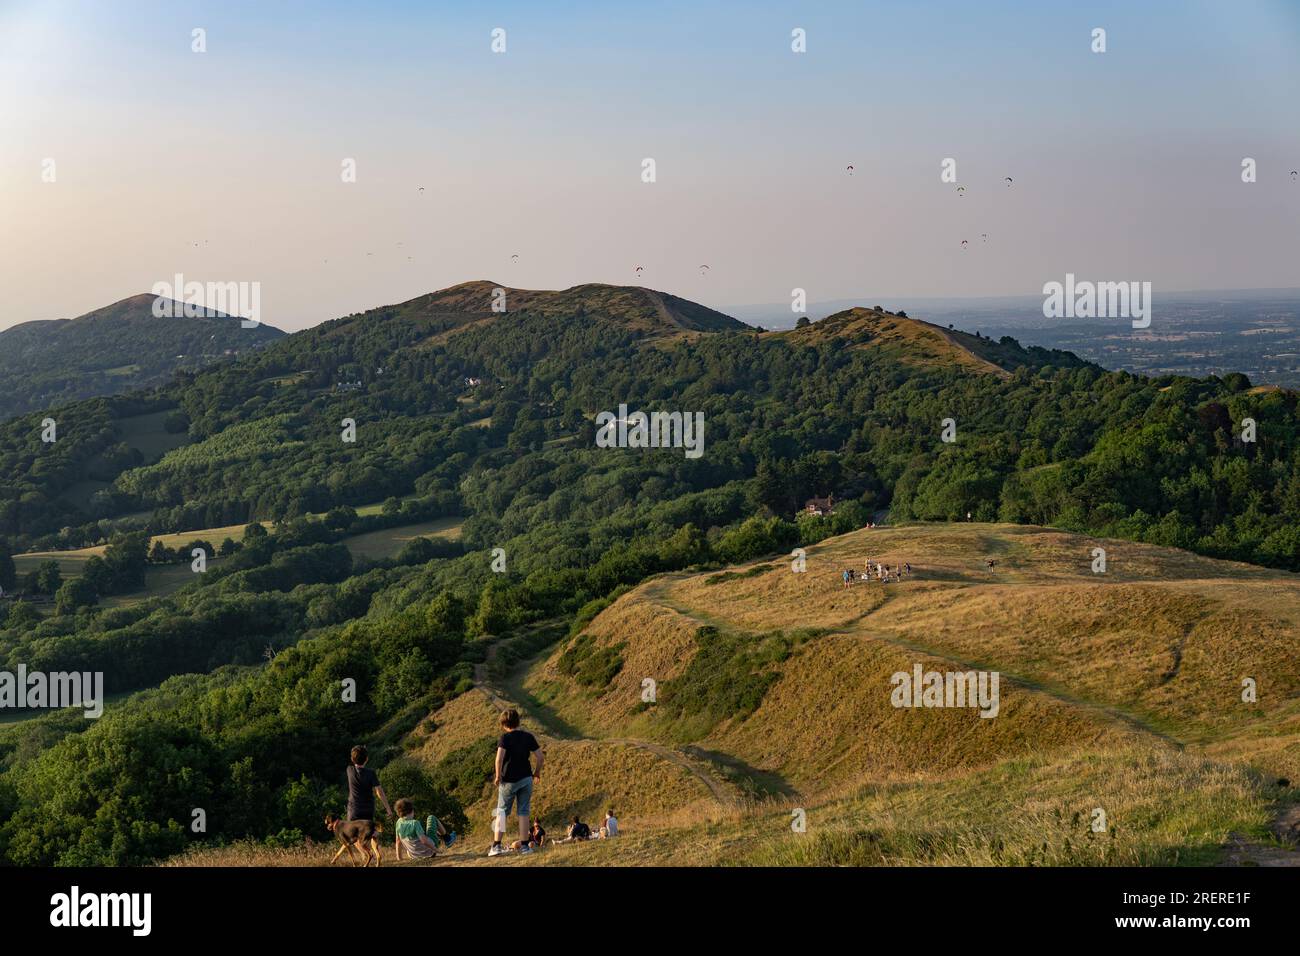 Malvern Hills Paragliding view from British Cump A peaceful rural landscape, with lush plant life and a distant ridge on the horizon. Tranquility perv Stock Photo